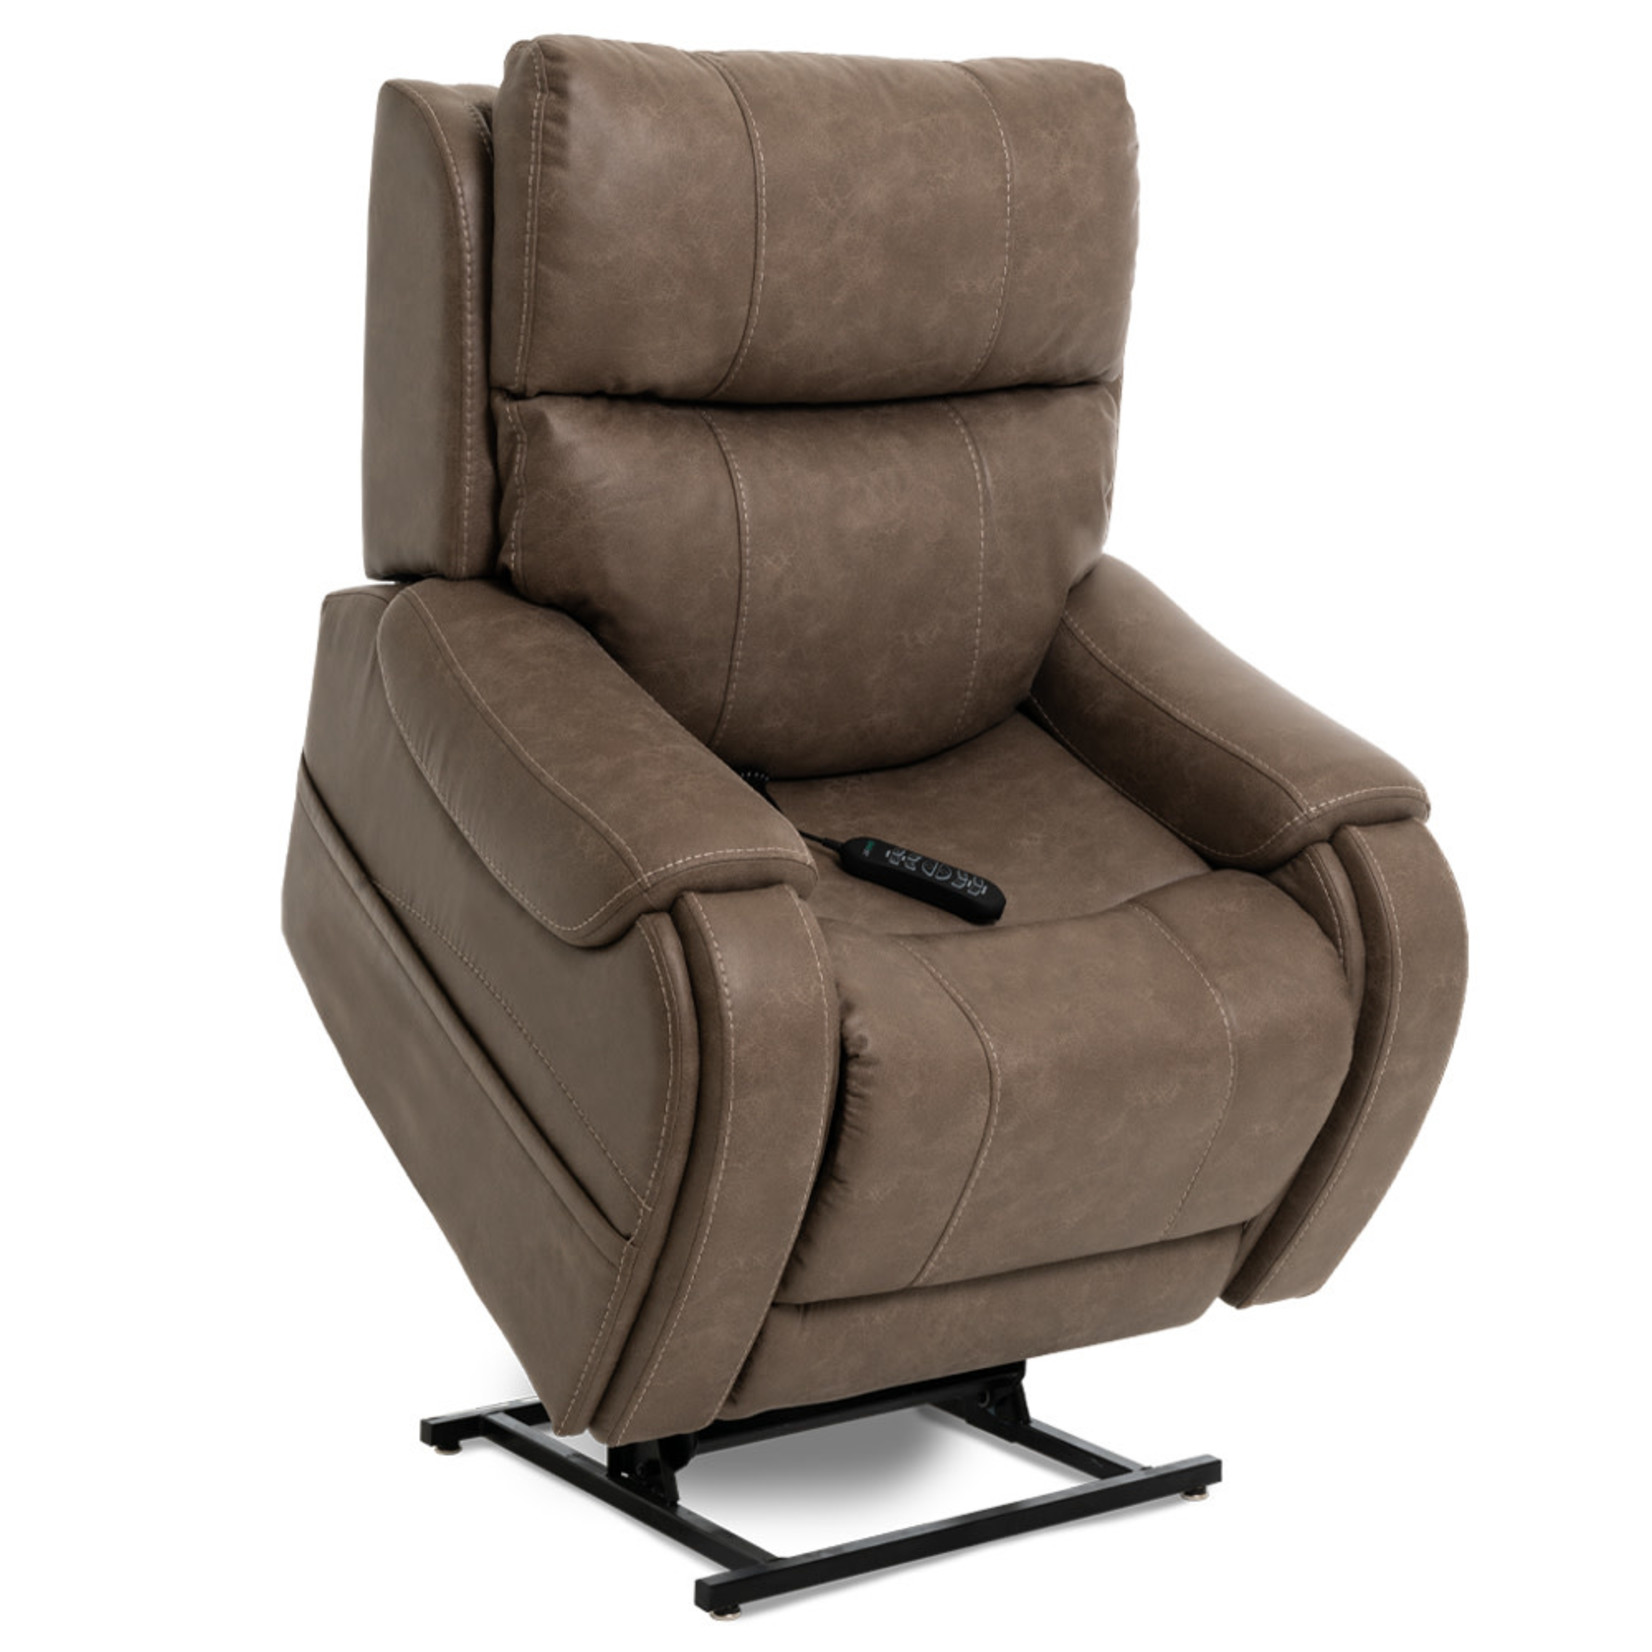 VivaLift! Power Lift Recliners Archives - Pride Mobility Canada